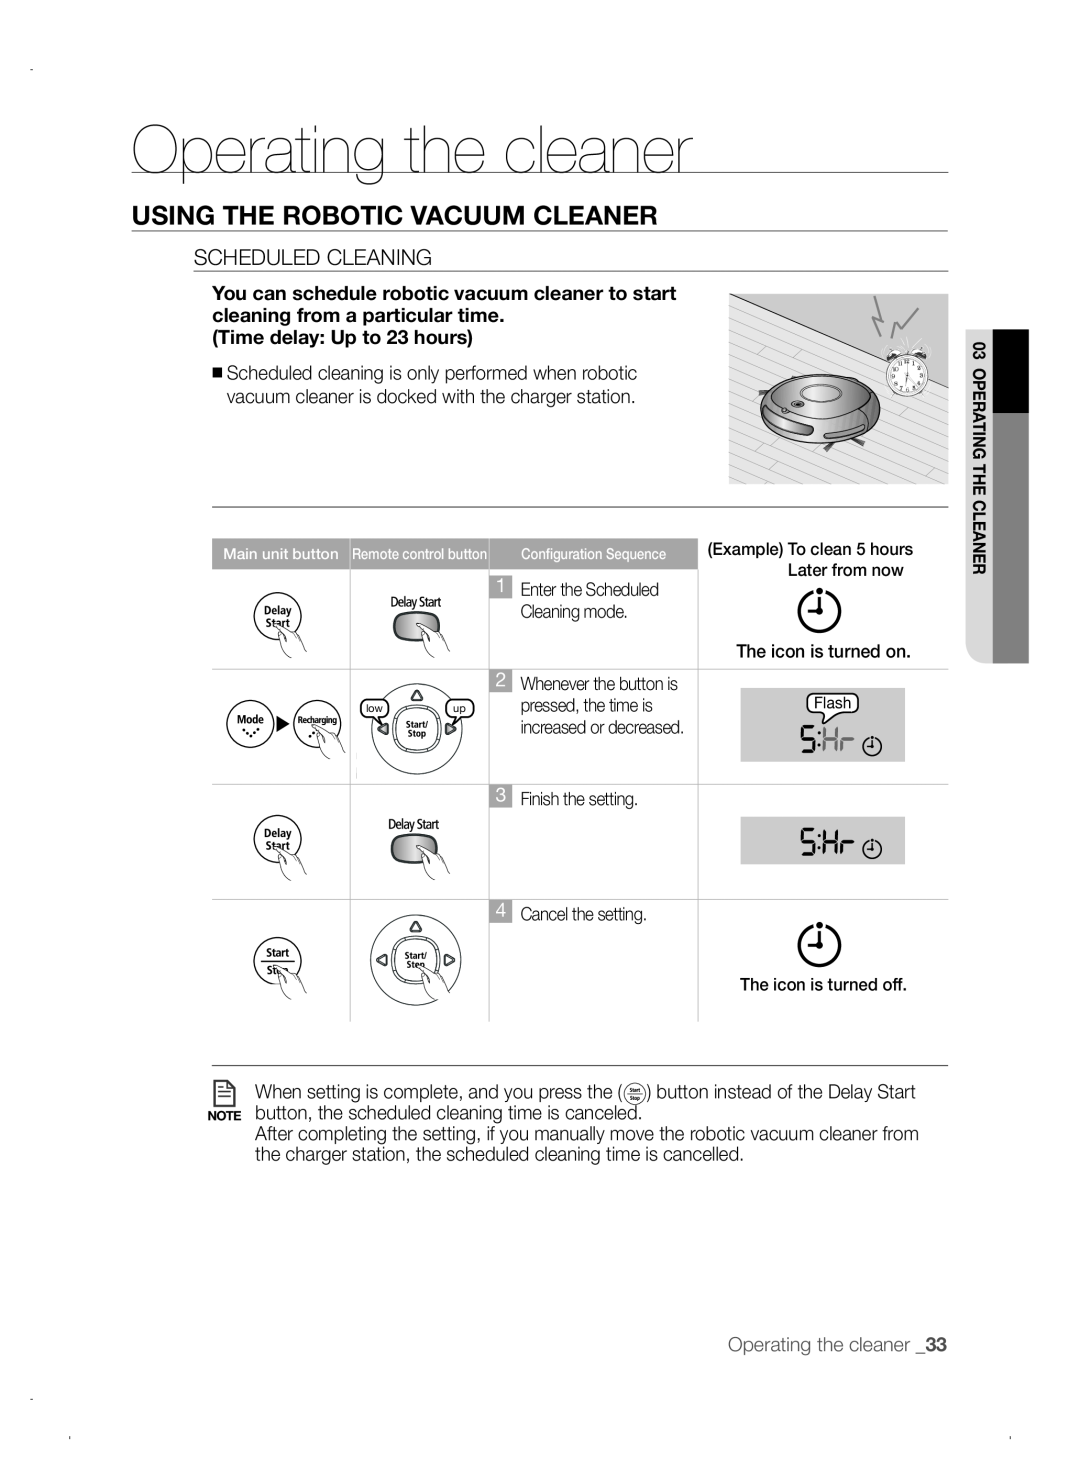 Samsung VCR8845T3A/XET, VCR8845T3A/XEF manual Operating the cleaner, Using the robotic vacuum cleaner, Scheduled Cleaning 